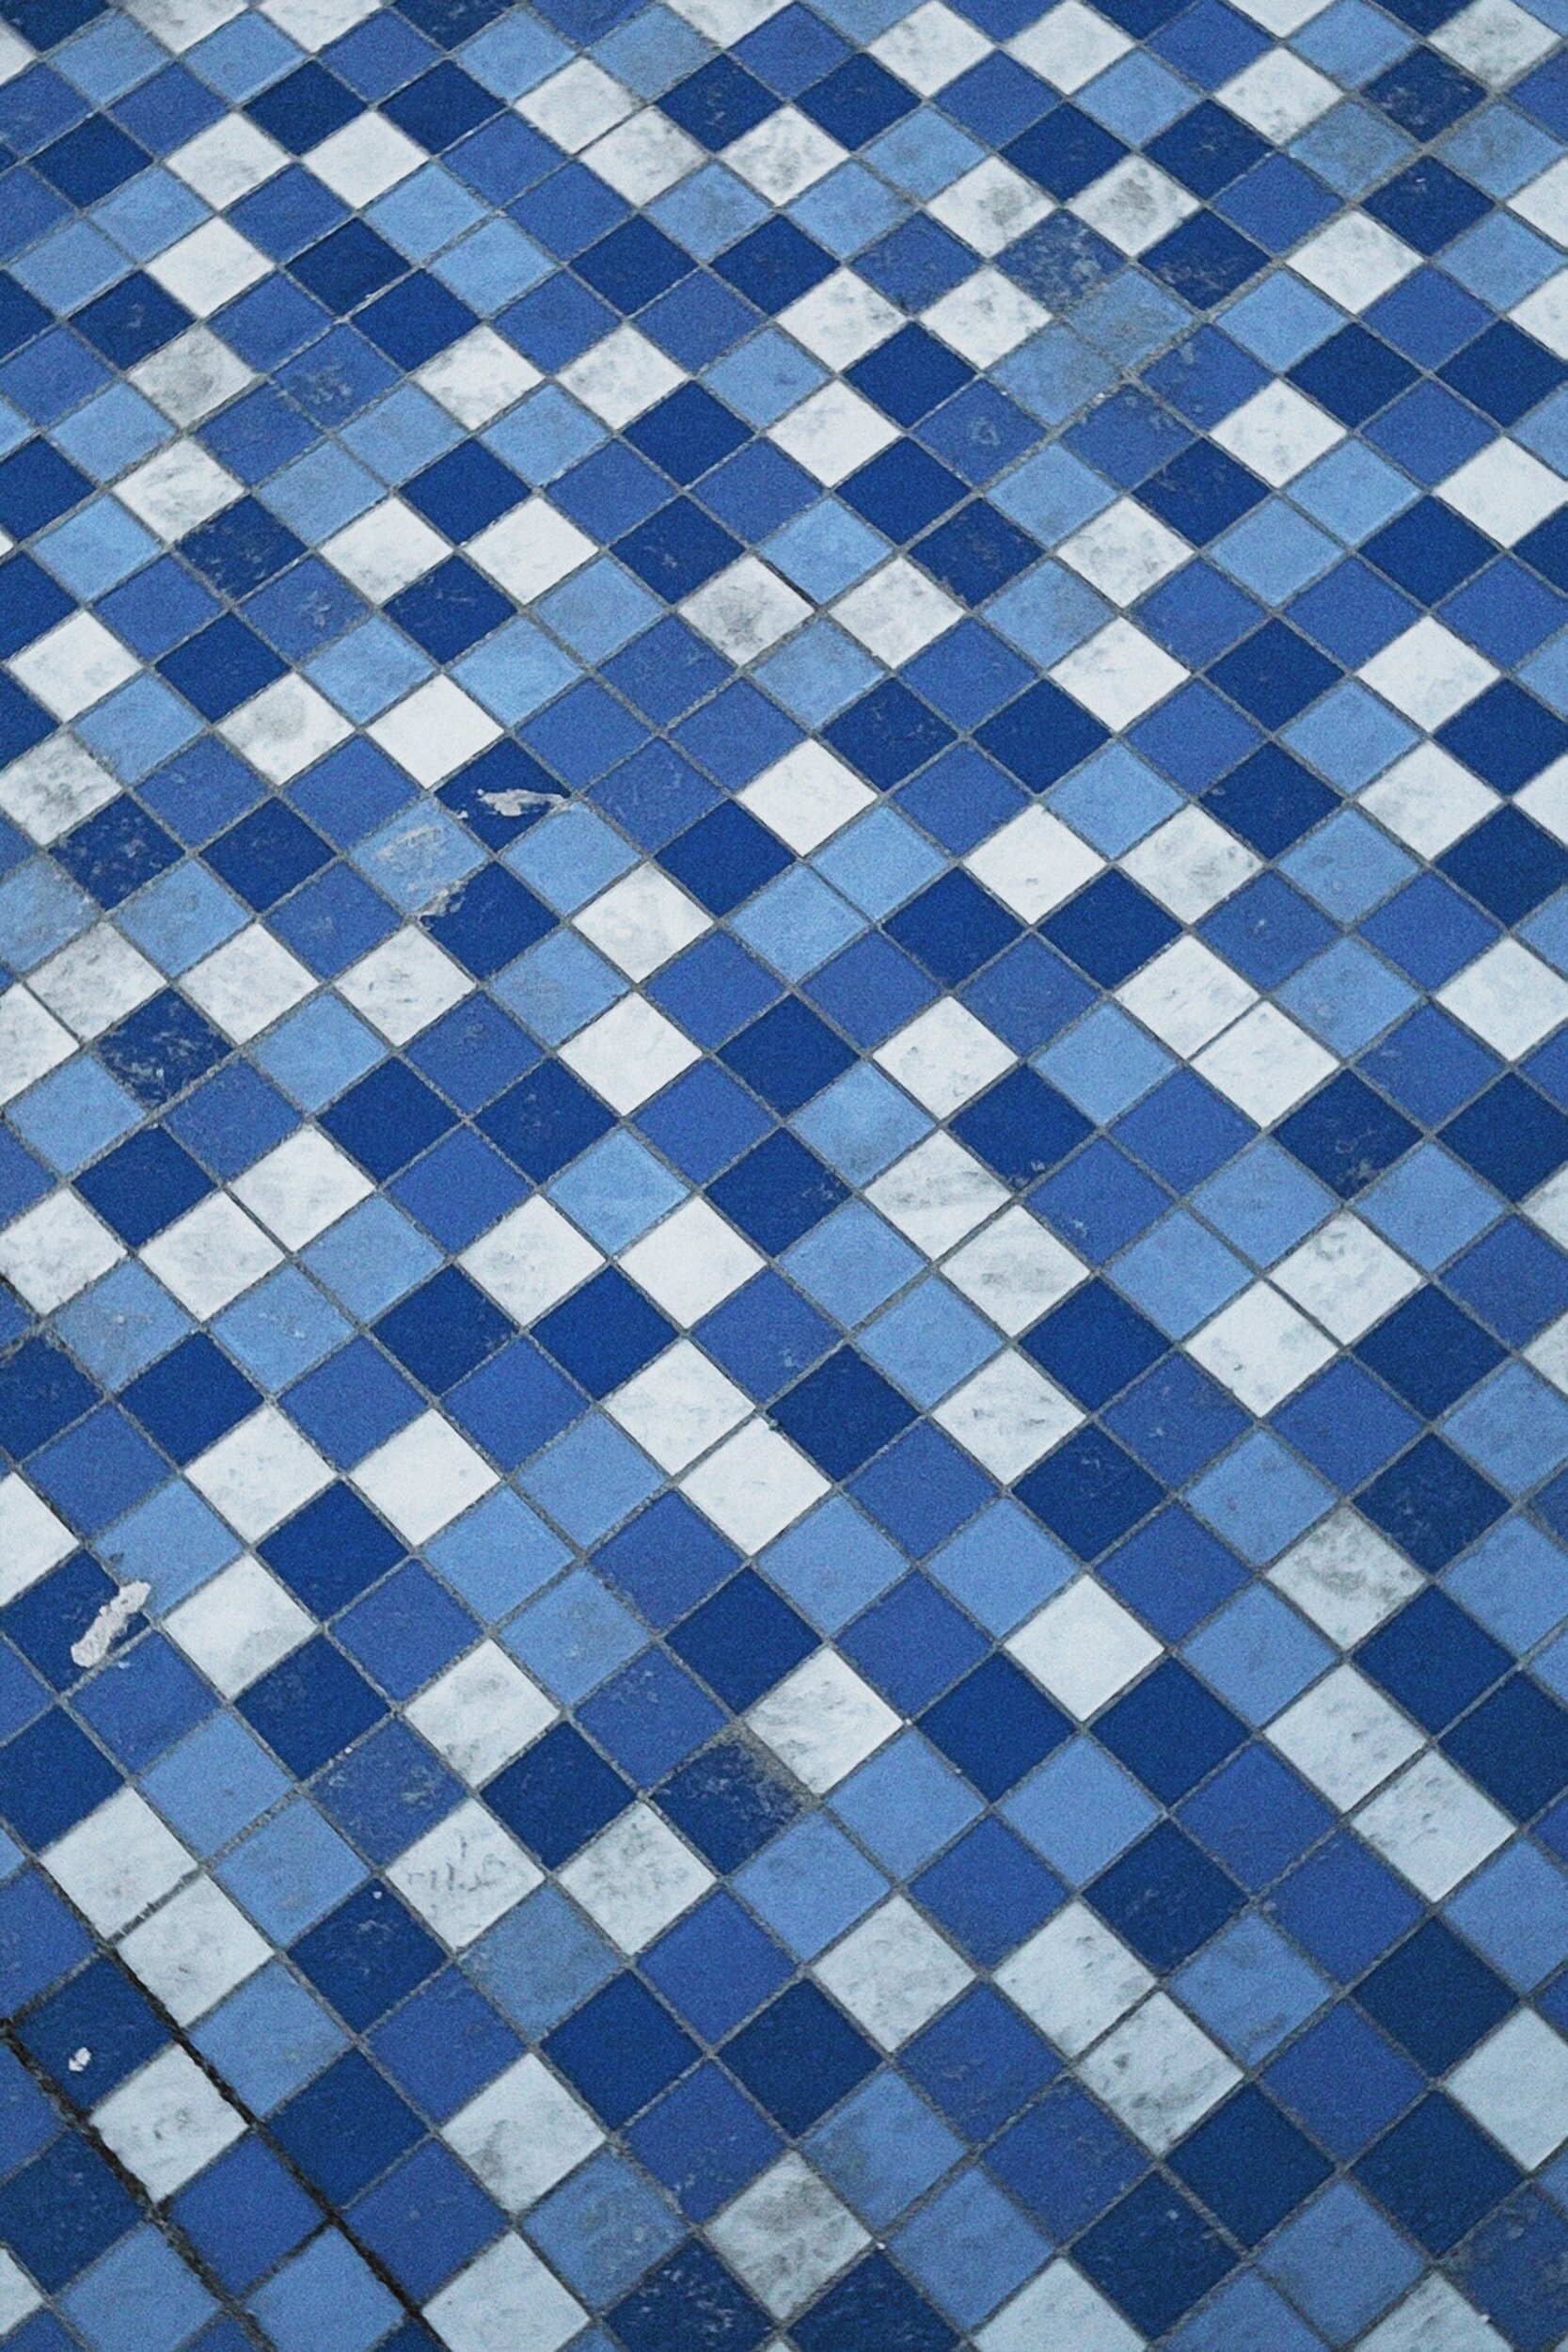 Example of tile flooring with specific color pallet 